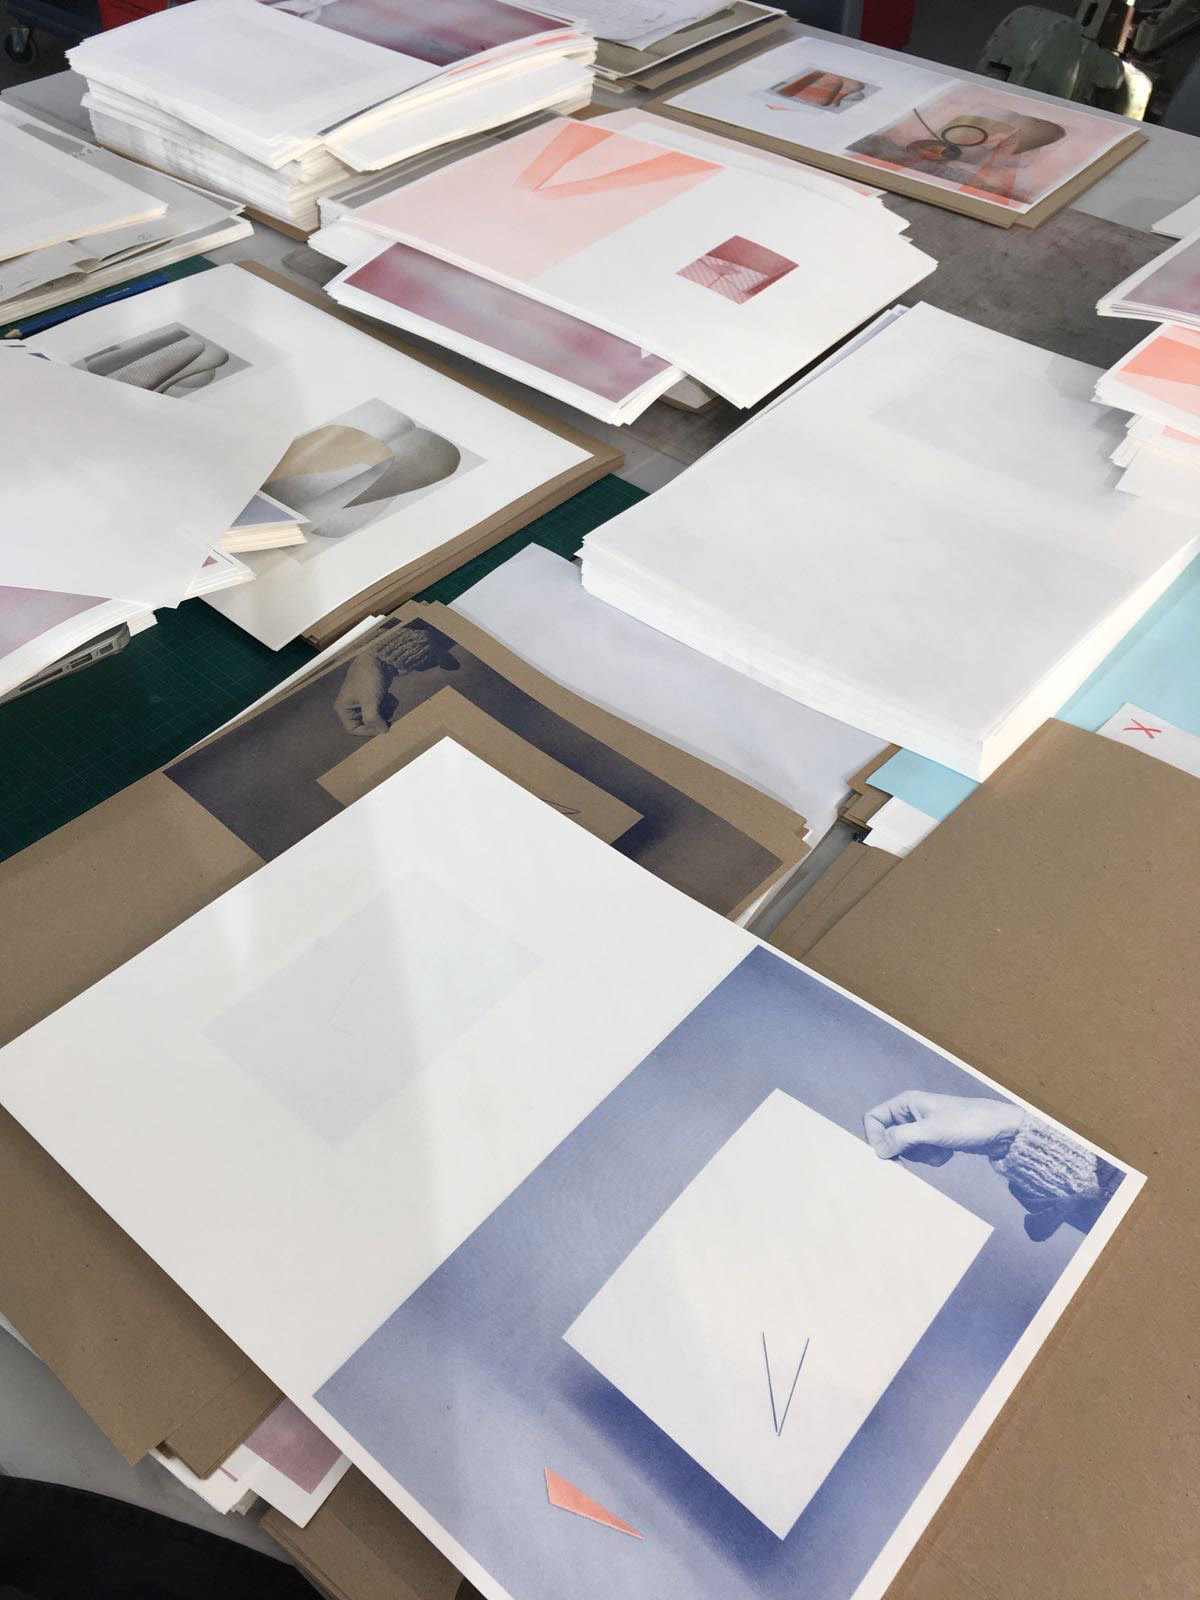 stacks of prints ready to be assembled for publication